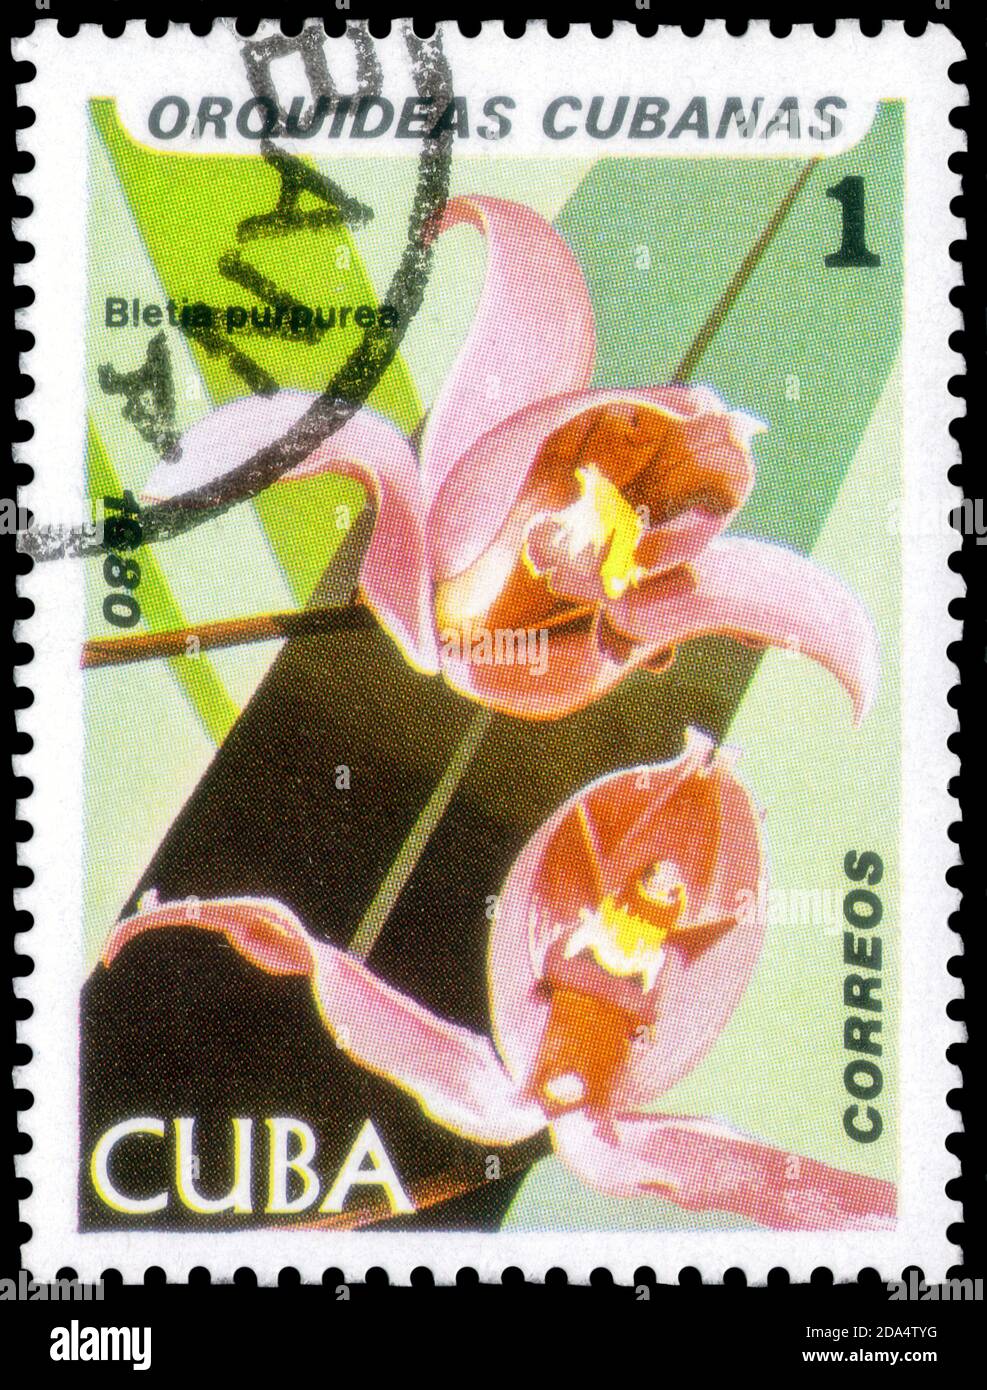 Saint Petersburg, Russia - September 18, 2020: Stamp printed in the Cuba with the image of the Bletia purpurea, circa 1980 Stock Photo